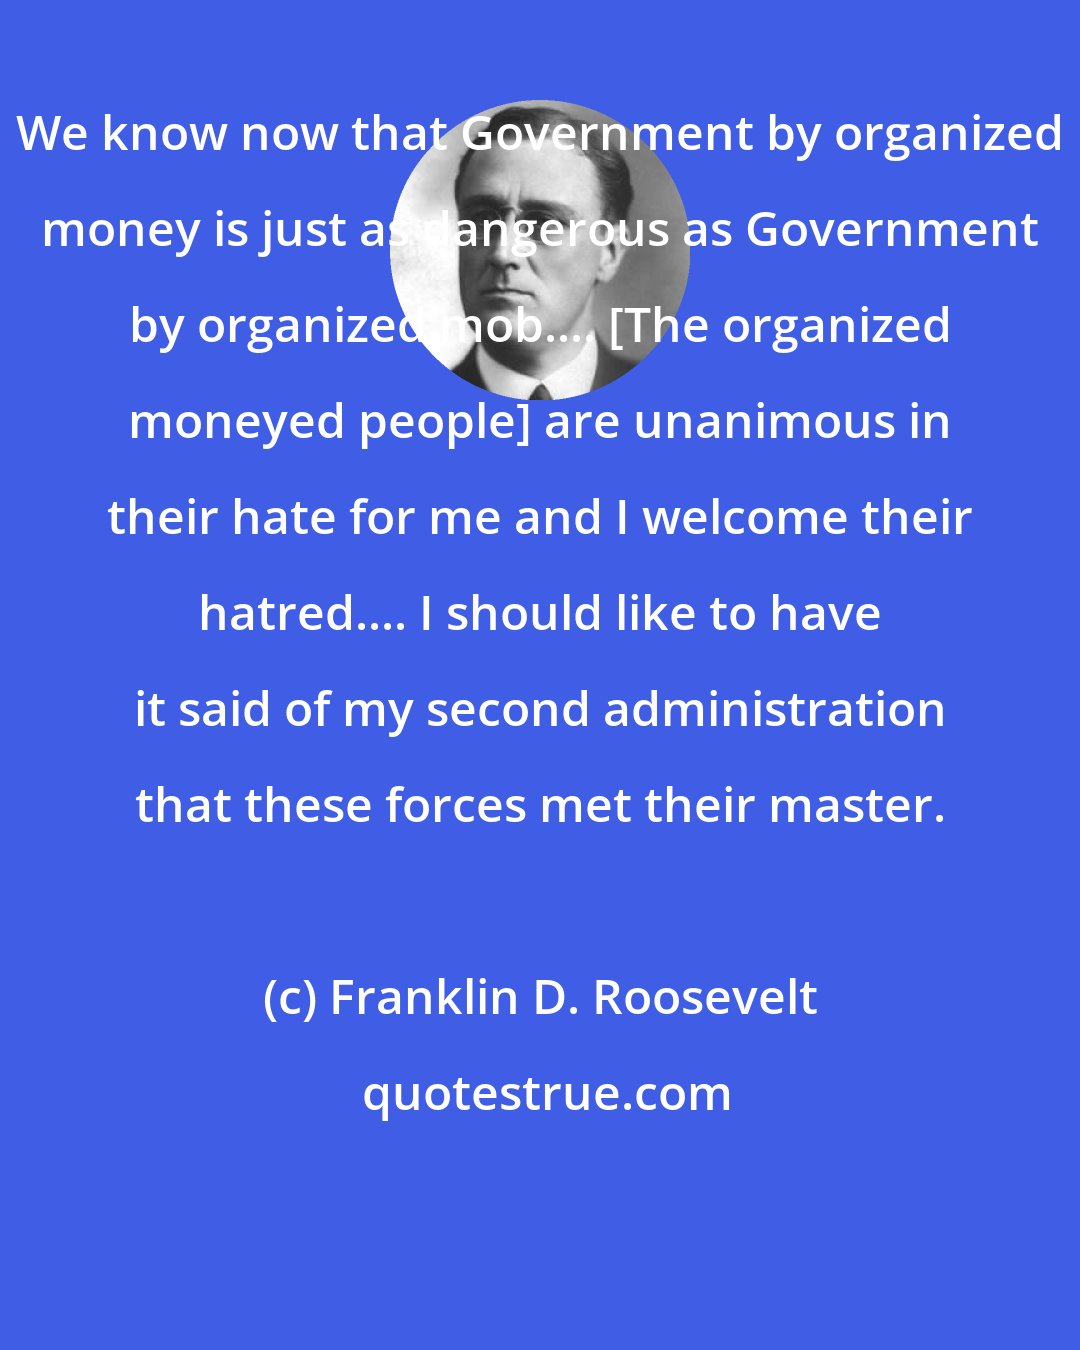 Franklin D. Roosevelt: We know now that Government by organized money is just as dangerous as Government by organized mob.... [The organized moneyed people] are unanimous in their hate for me and I welcome their hatred.... I should like to have it said of my second administration that these forces met their master.